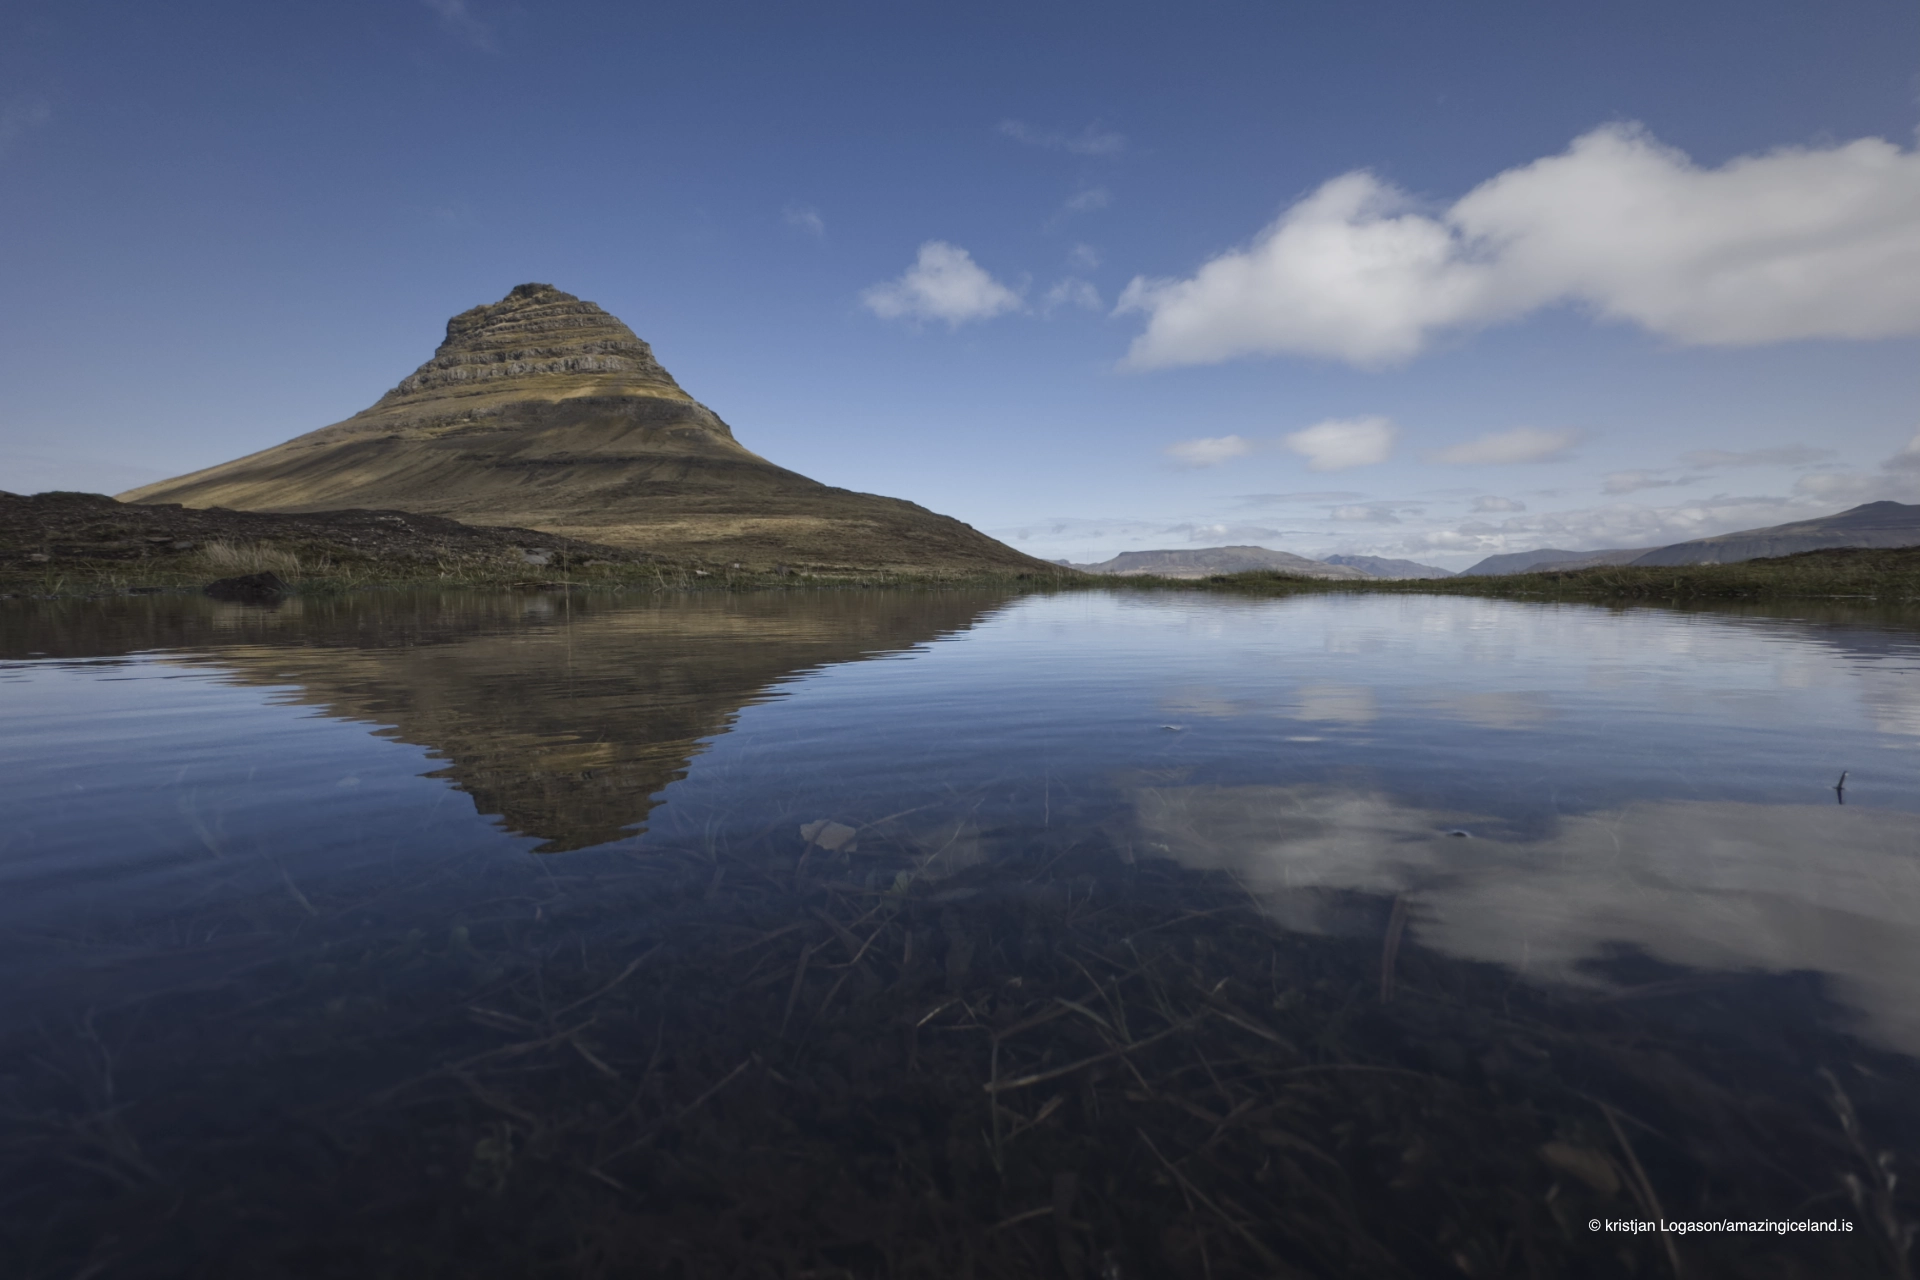 Reflection of The mountain Kirkjufell in a pool of water